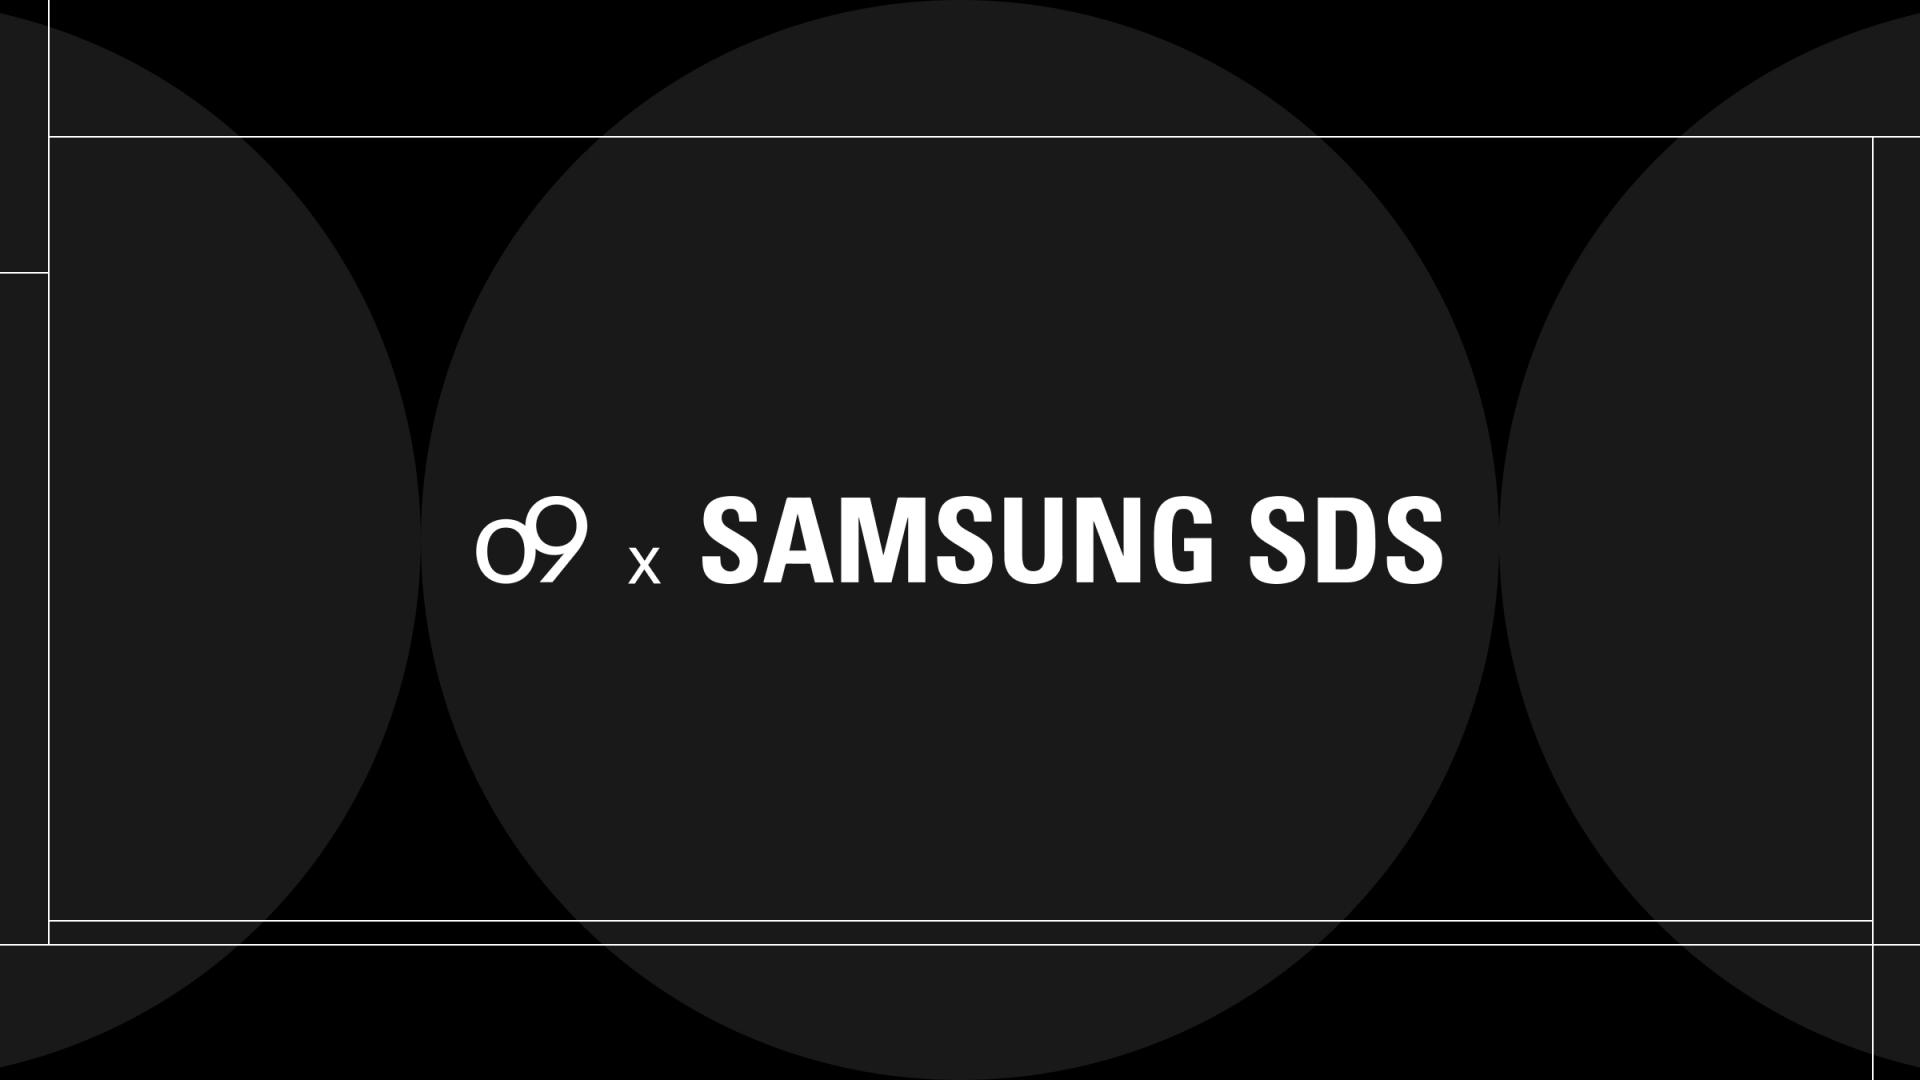 o9 Solutions and Samsung SDS Bring the Full Power of o9’s Digital Brain Platform to a Wider Range of Users Through an Enhanced Mobile Experience